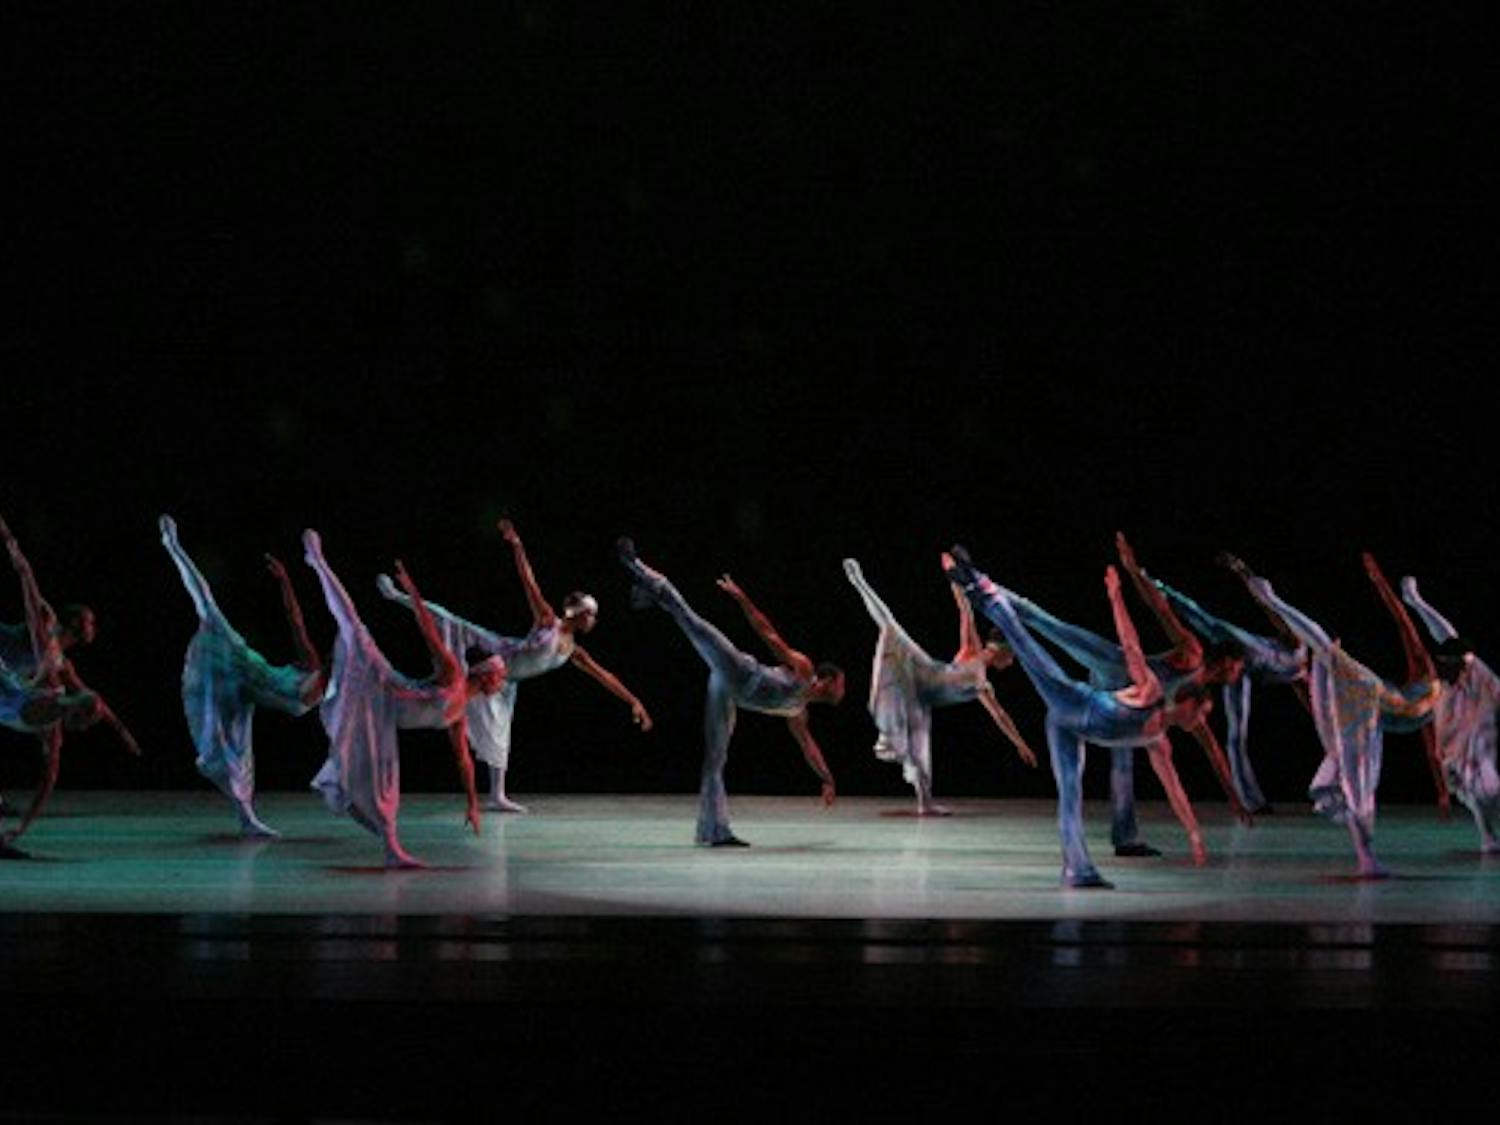 The Alvin Ailey American Dance Theater performs at Memorial Hall on Saturday night. DTH/Zach Gutterman